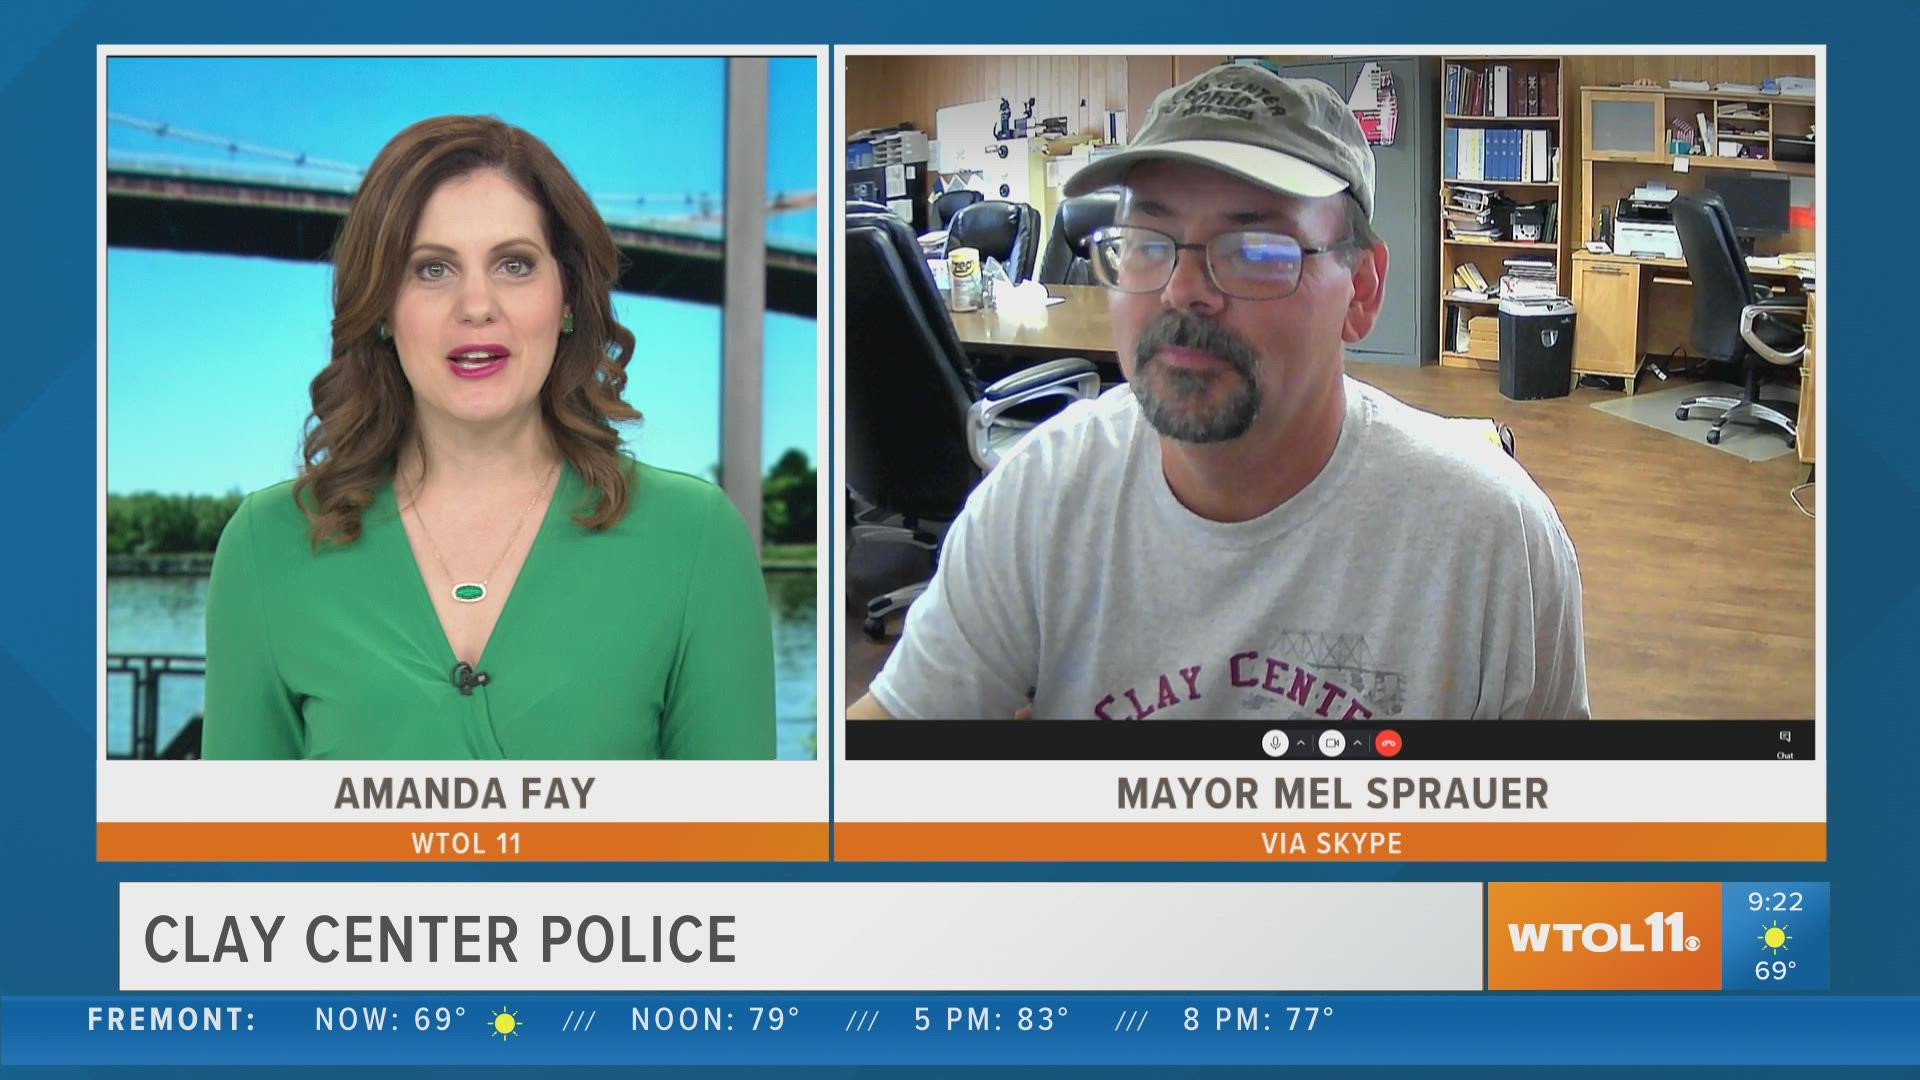 Clay Center is looking to hire police officers - Mayor Mel Sprauer has more!